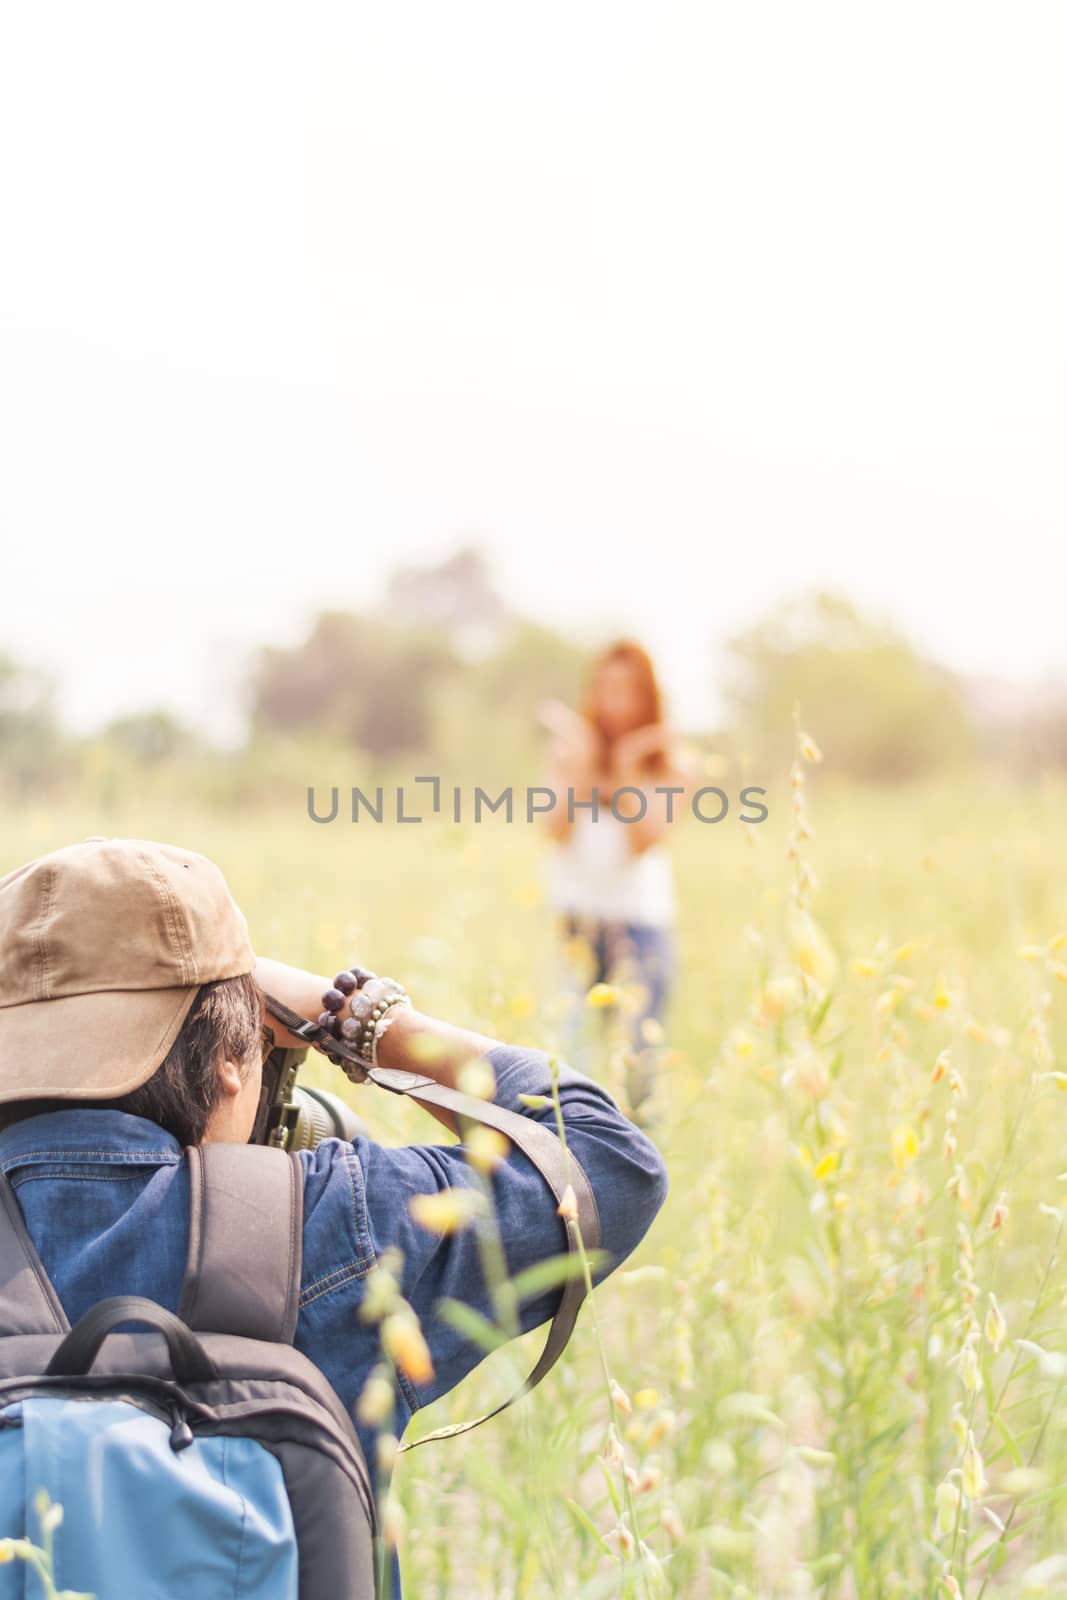 Man photographing young beautiful woman against in green field attractions, Summer time, outdoors, portrait of young couple in outdoors